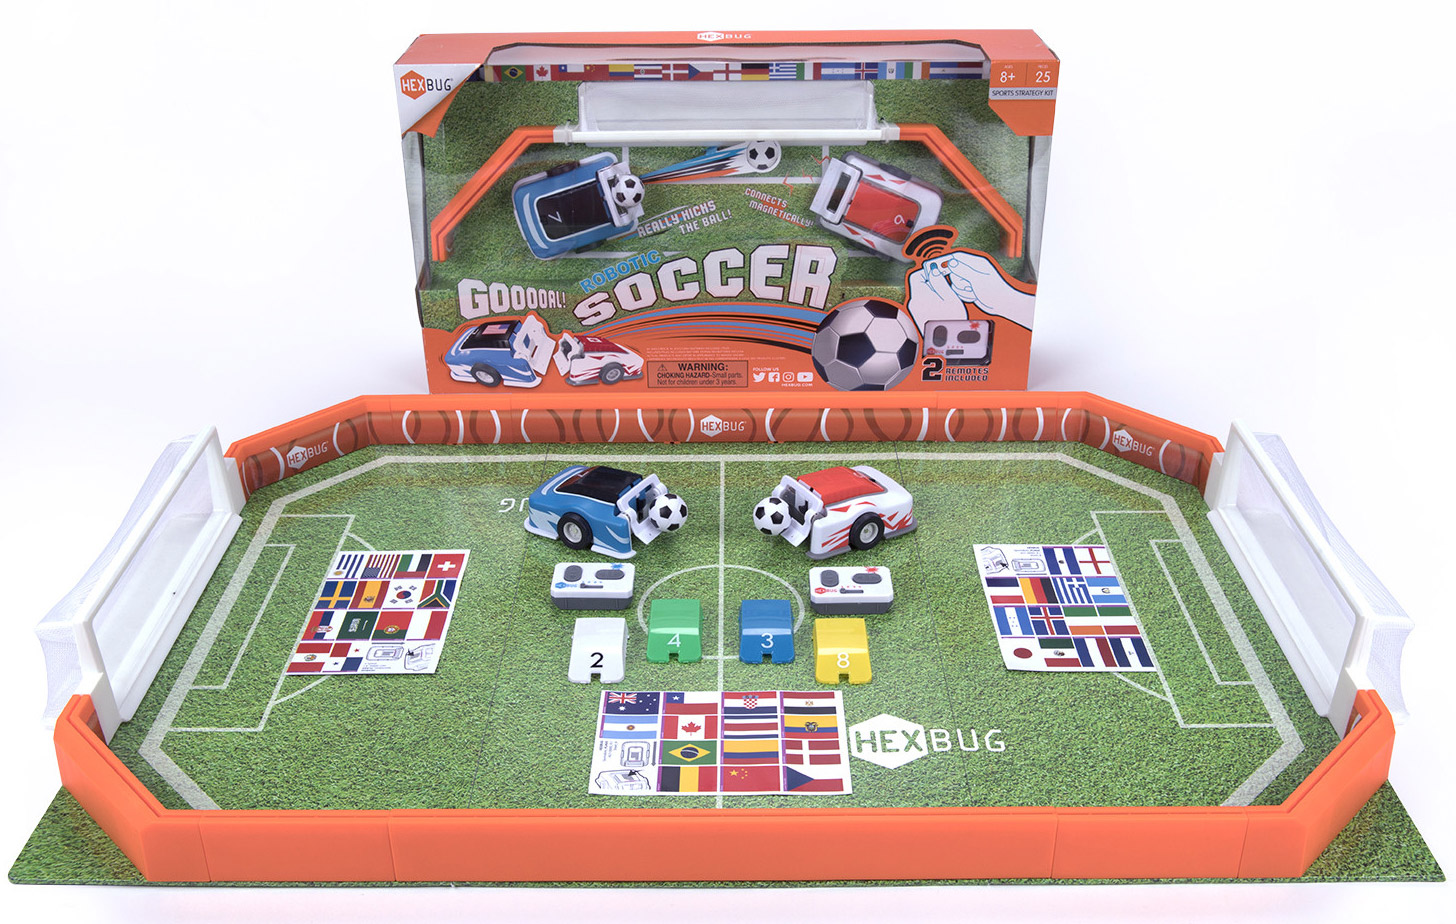 Get a Kick out of Robotic Soccer - The 